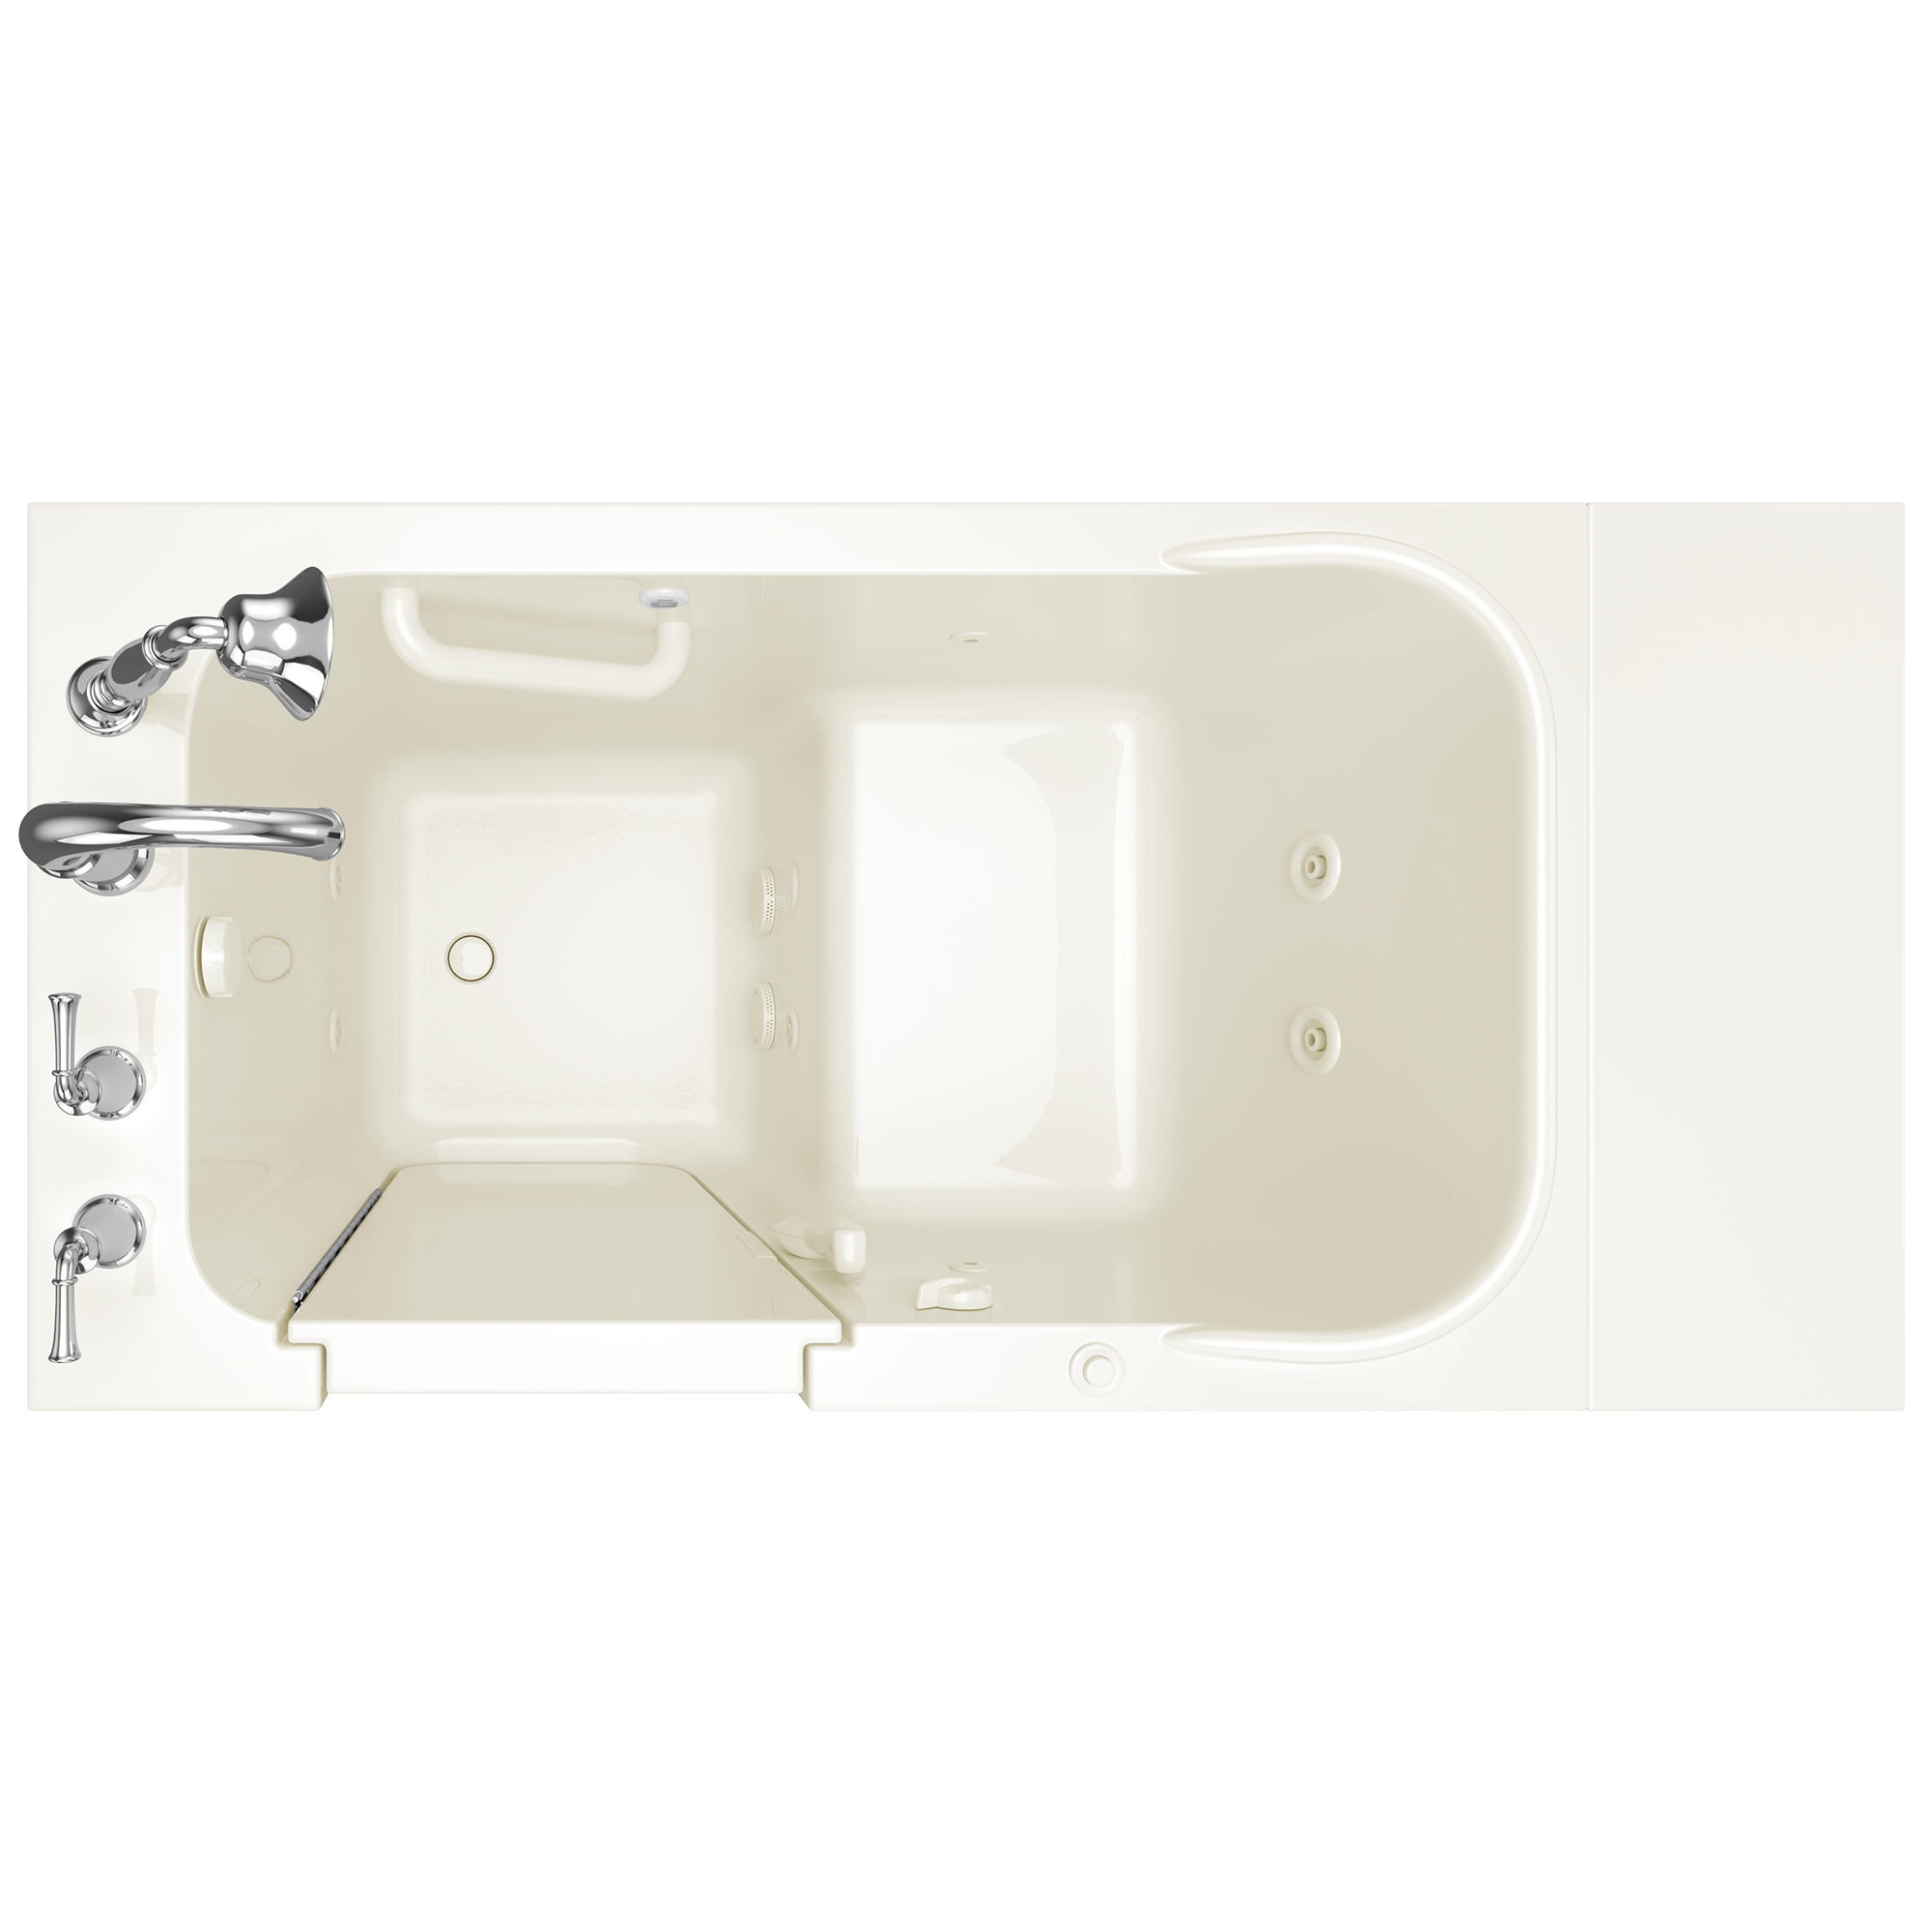 Gelcoat Value Series 28 x 48-Inch Walk-in Tub With Whirlpool System - Left-Hand Drain With Faucet